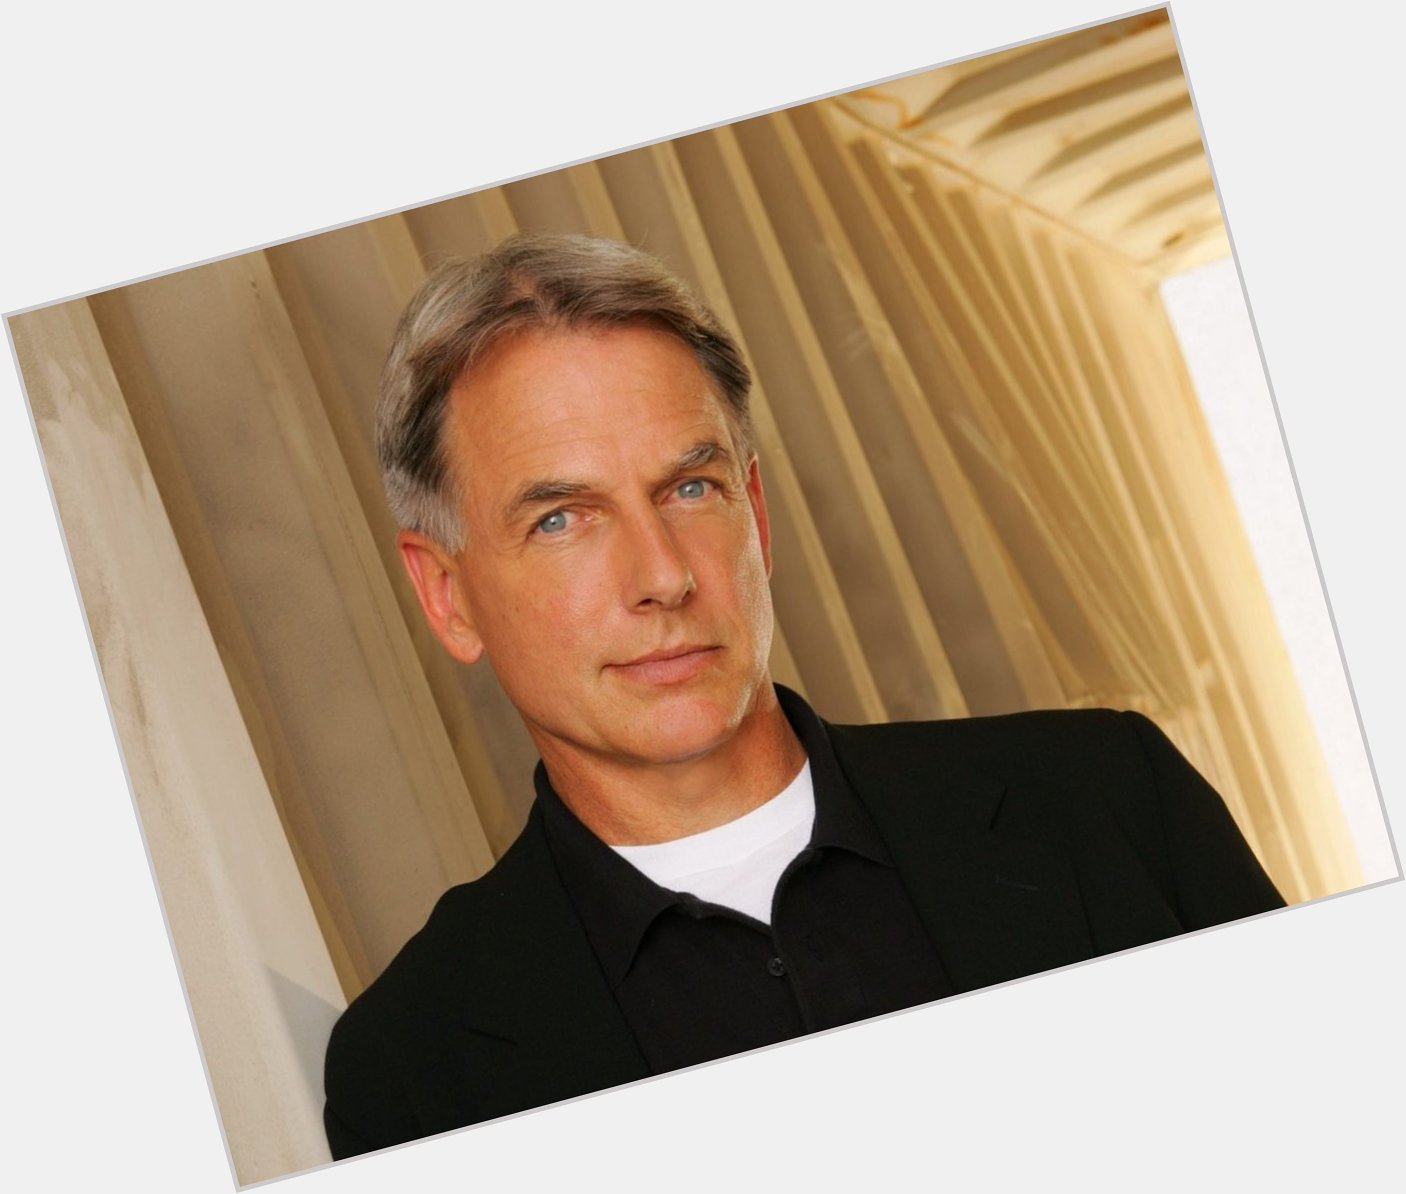 September 2, 2020
Happy birthday to American actor Mark Harmon 69 years old. 